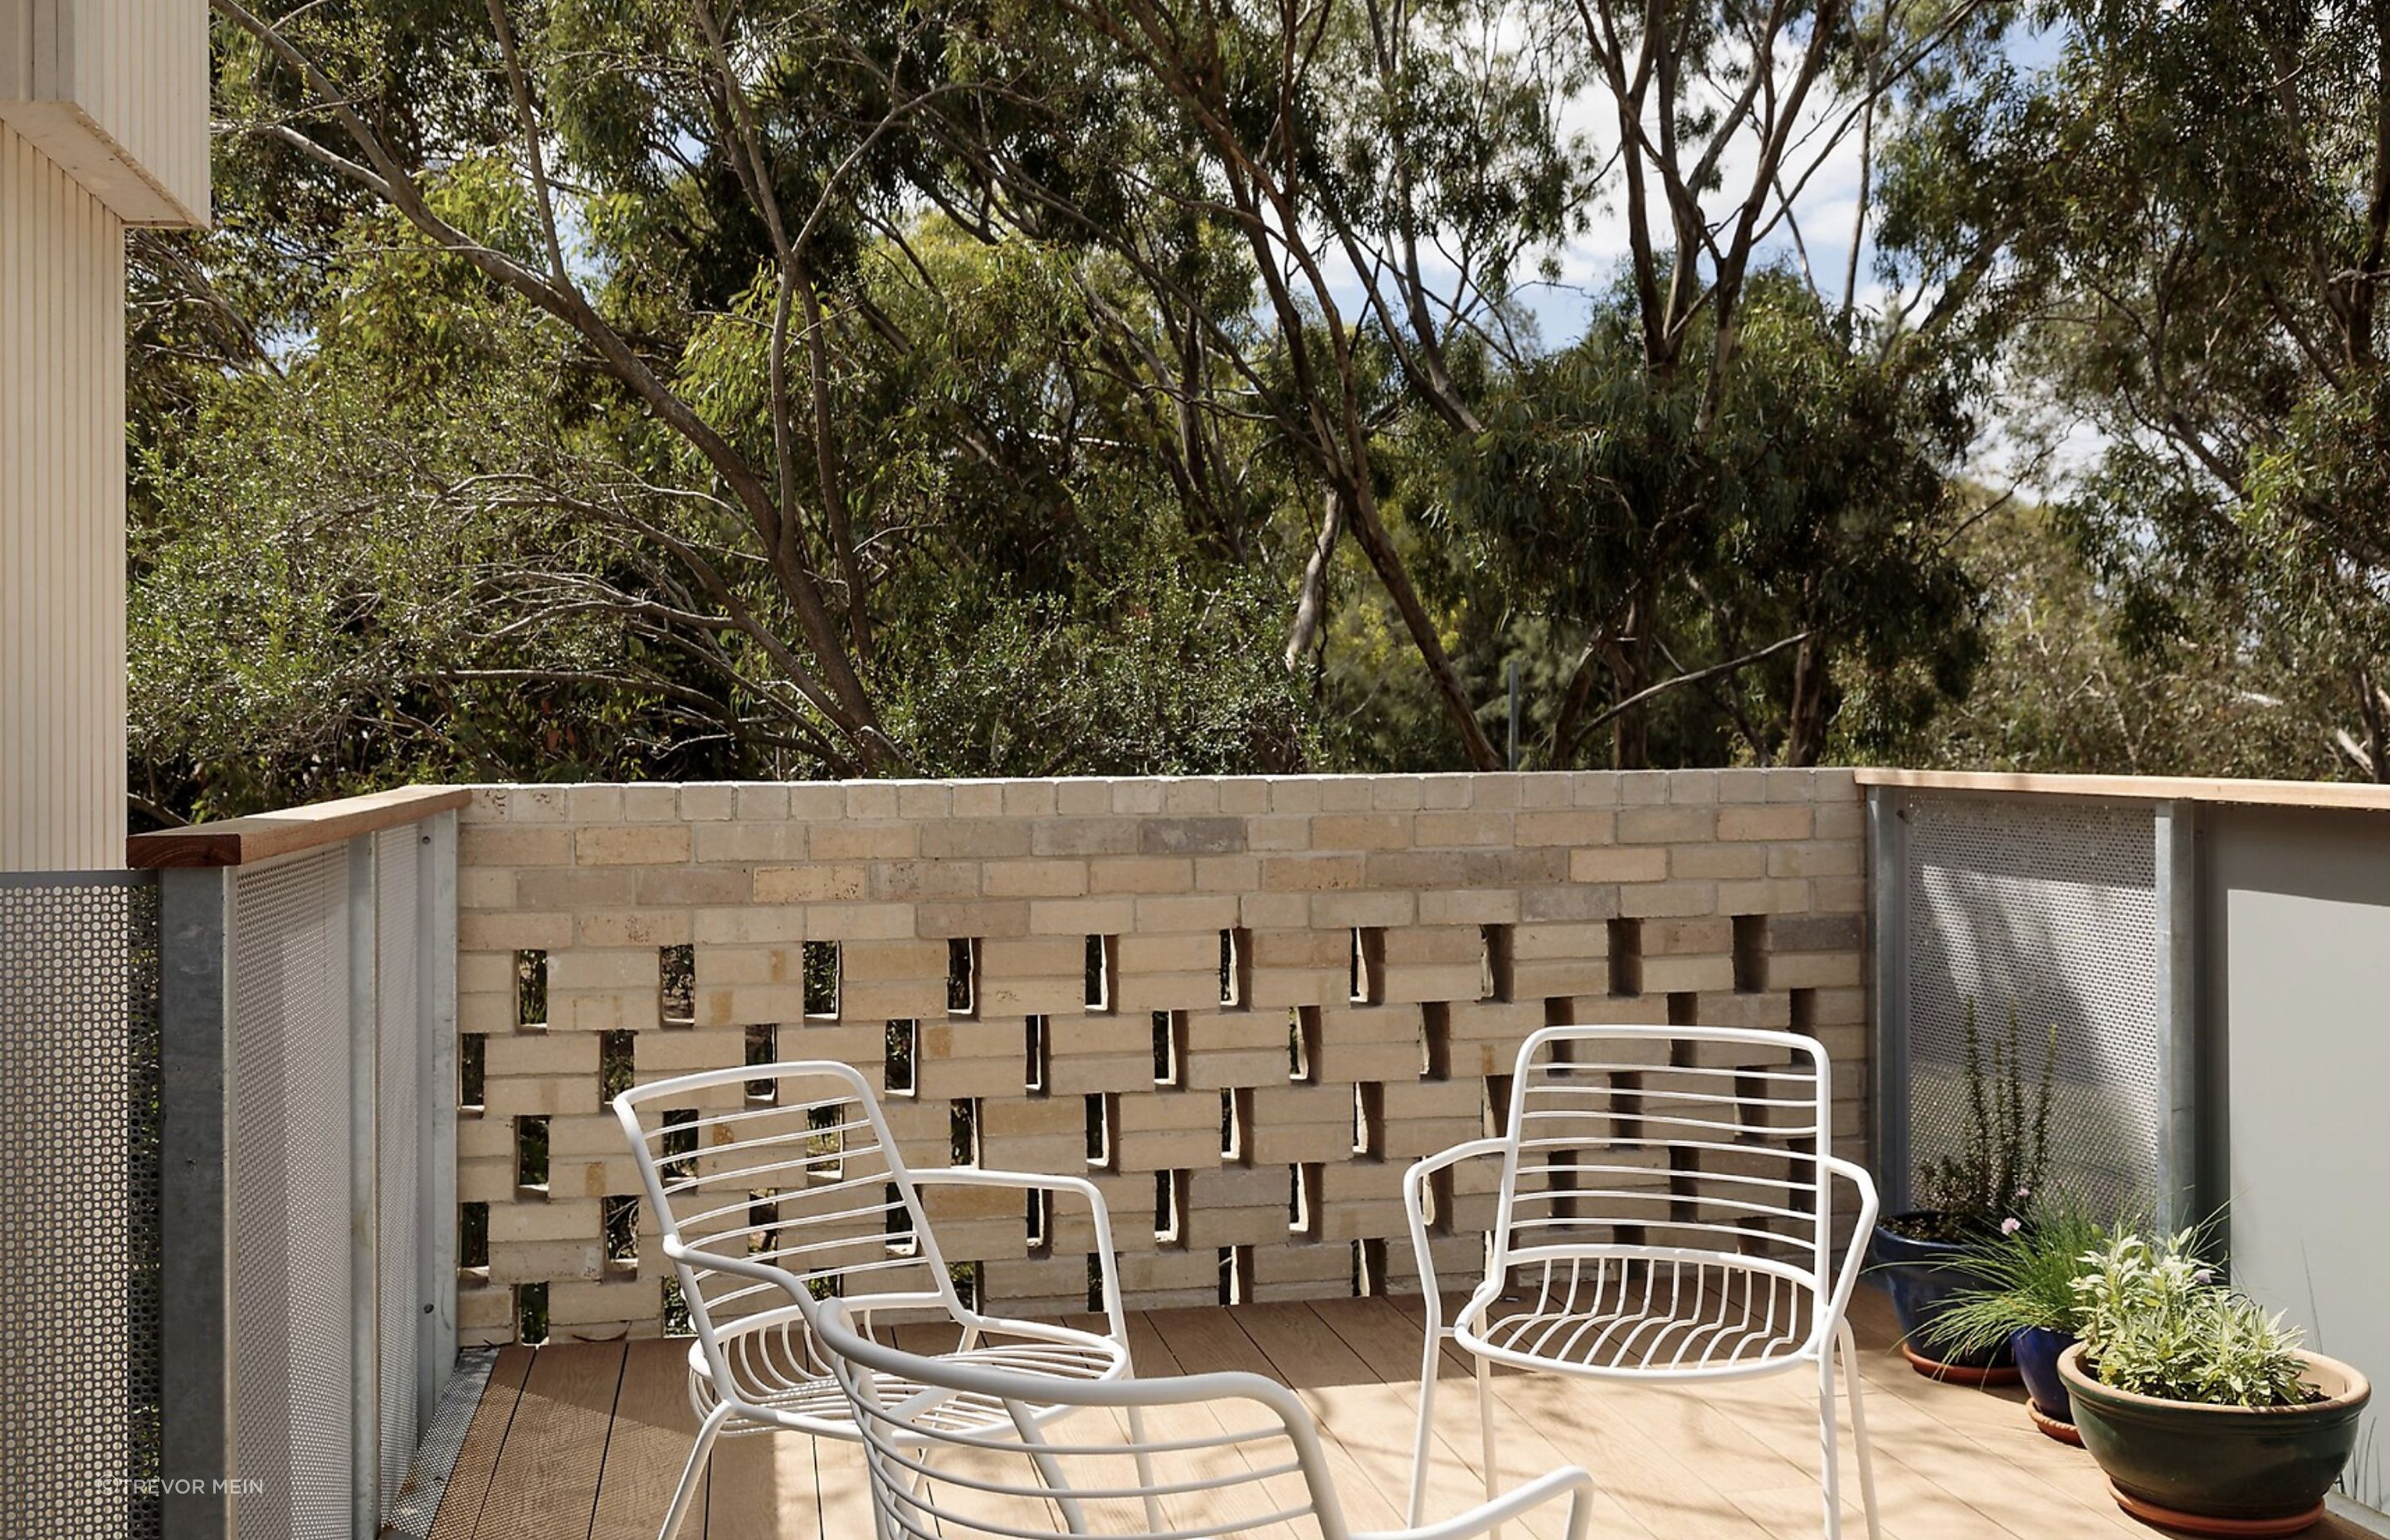 Materials selected enhance the relationship between the home and its natural surrounds, coalescing these private and public spaces with a sense of quietude so that the park remains the primary focus.